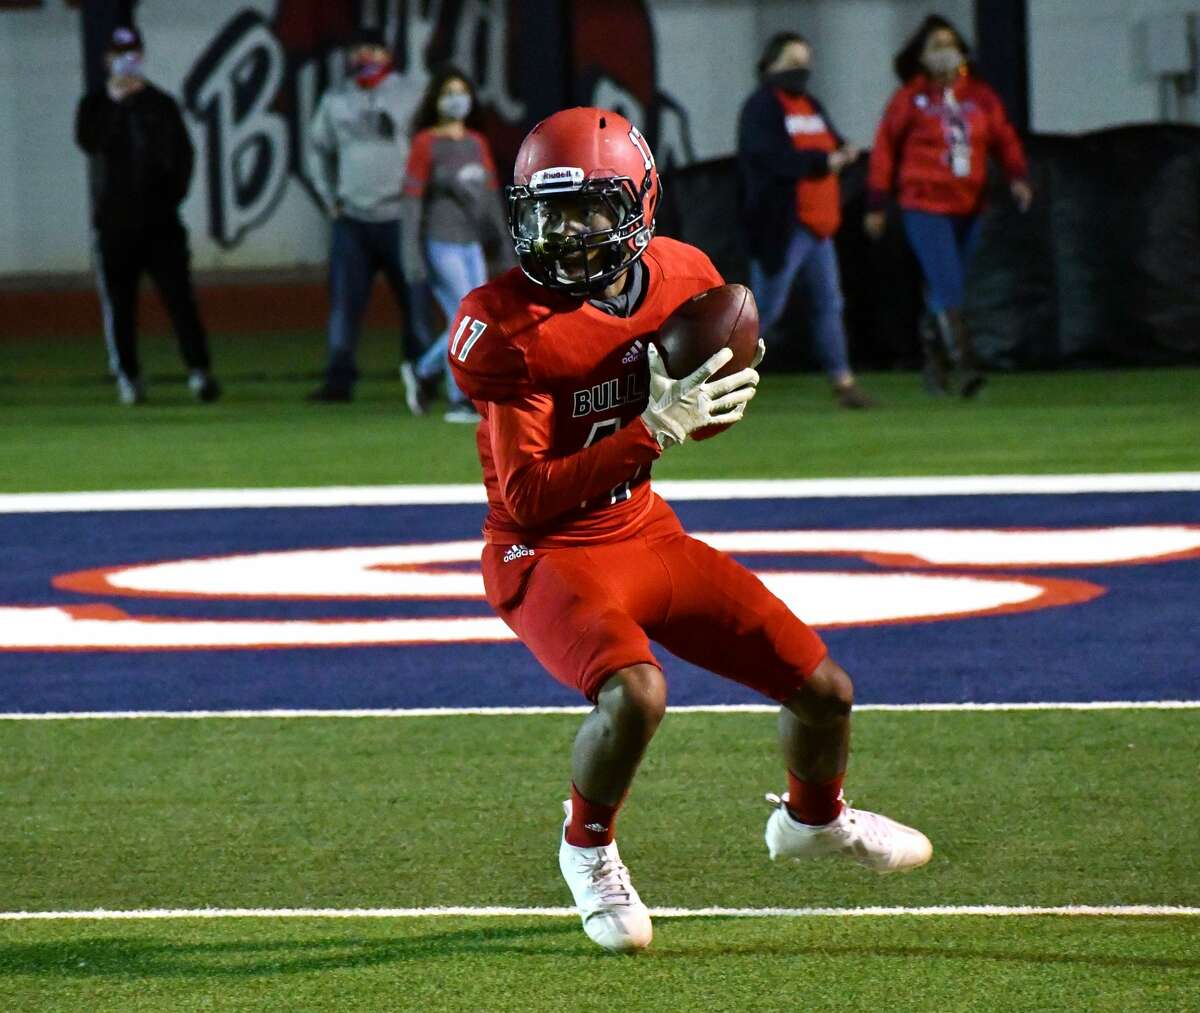 Plainview fell 47-13 to Wichita Falls in its home finale during a District 3-5A Division II football game on Friday, Nov. 20, 2020 in Greg Sherwood Memorial Bulldog Stadium.